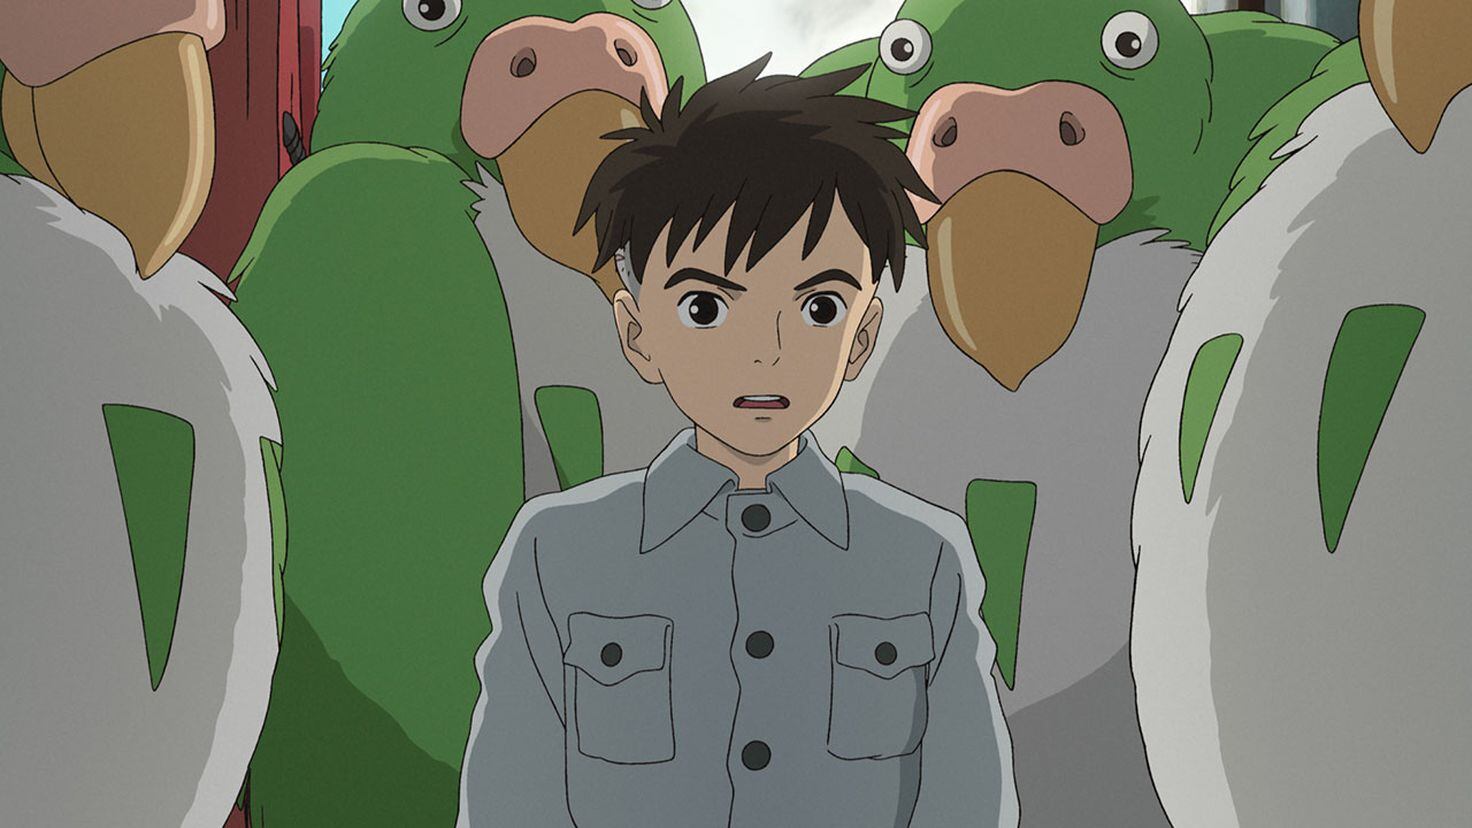 “The Boy and the Heron” dominates the US box office and makes history with its premiere